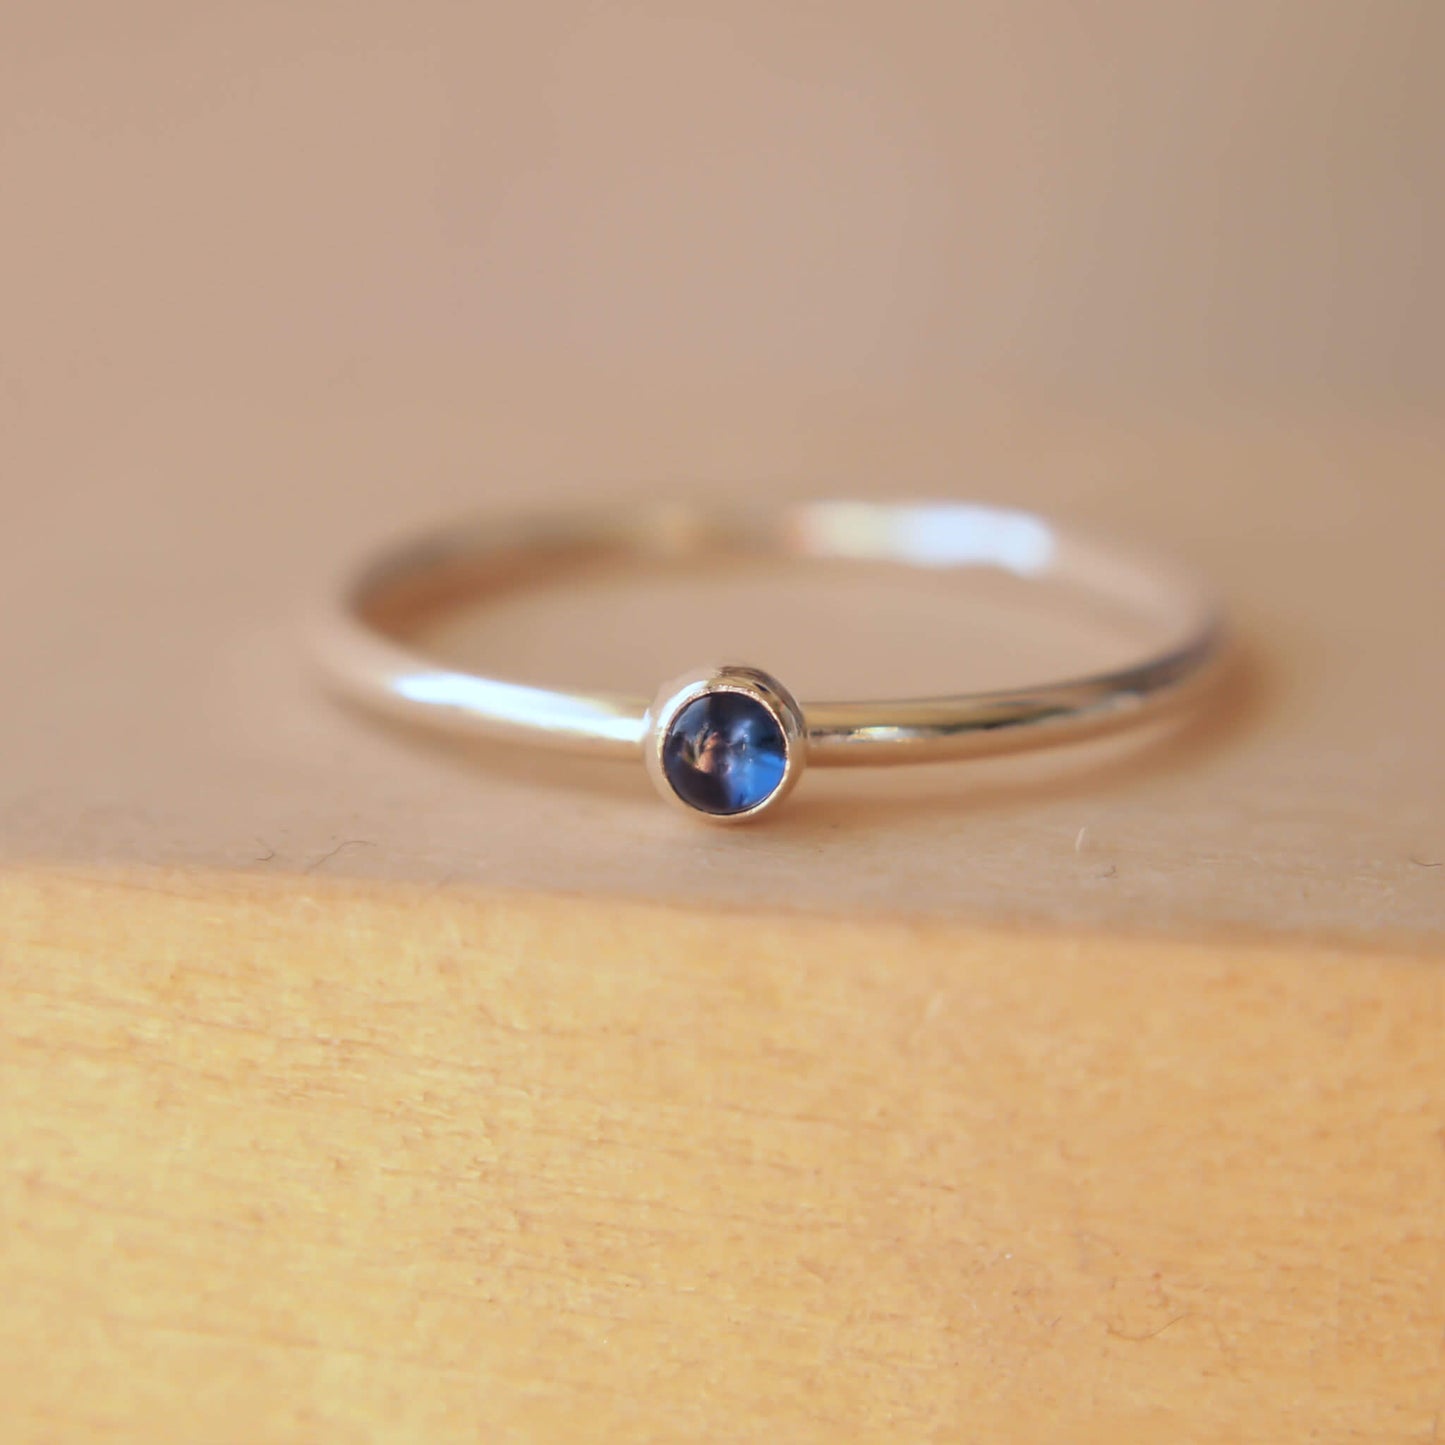 Sapphire and Sterling Silver simple stacking ring with small gemstone